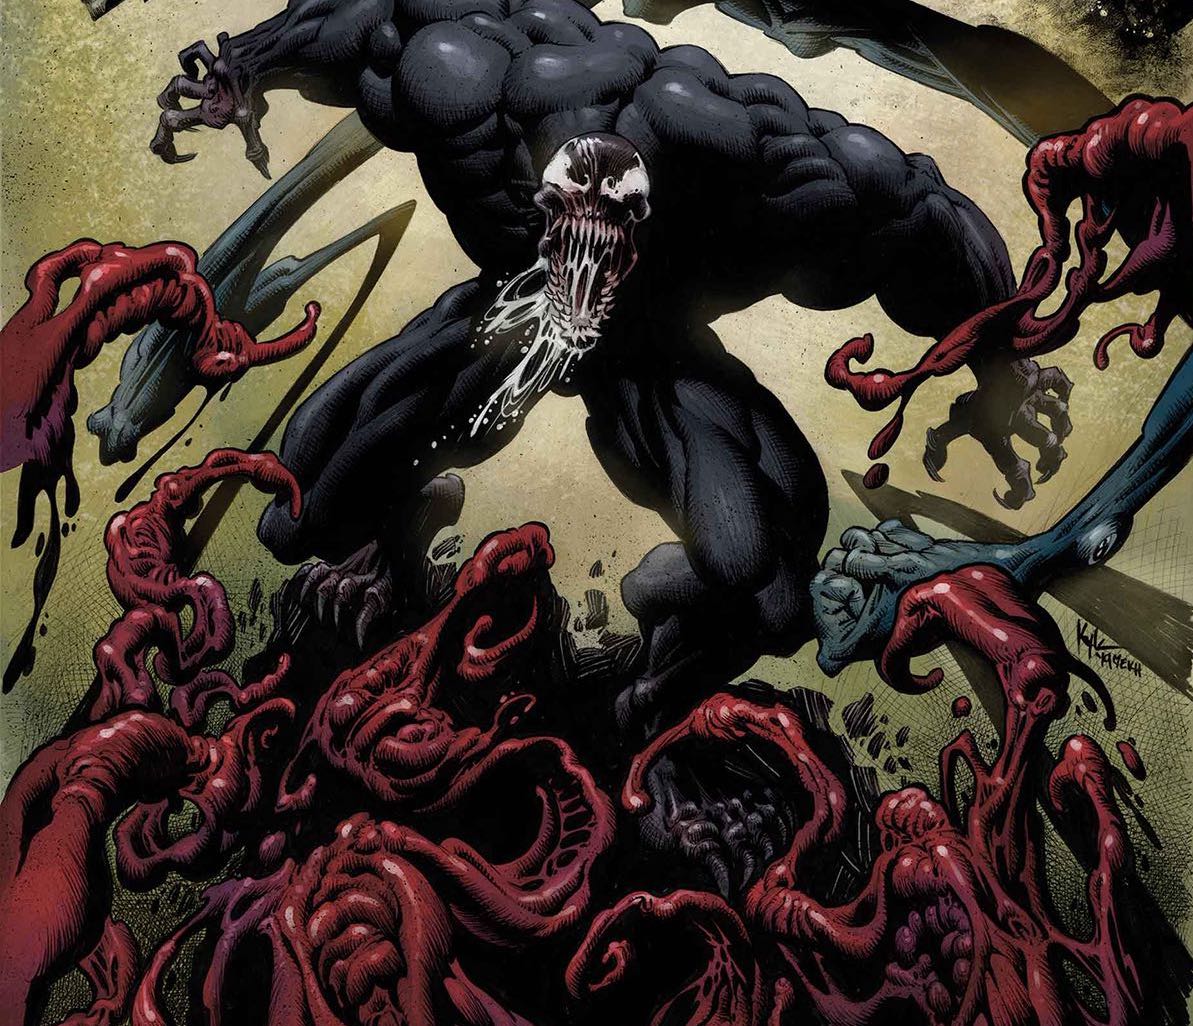 Get a look at the newest Symbiote hybrid in Venom #18